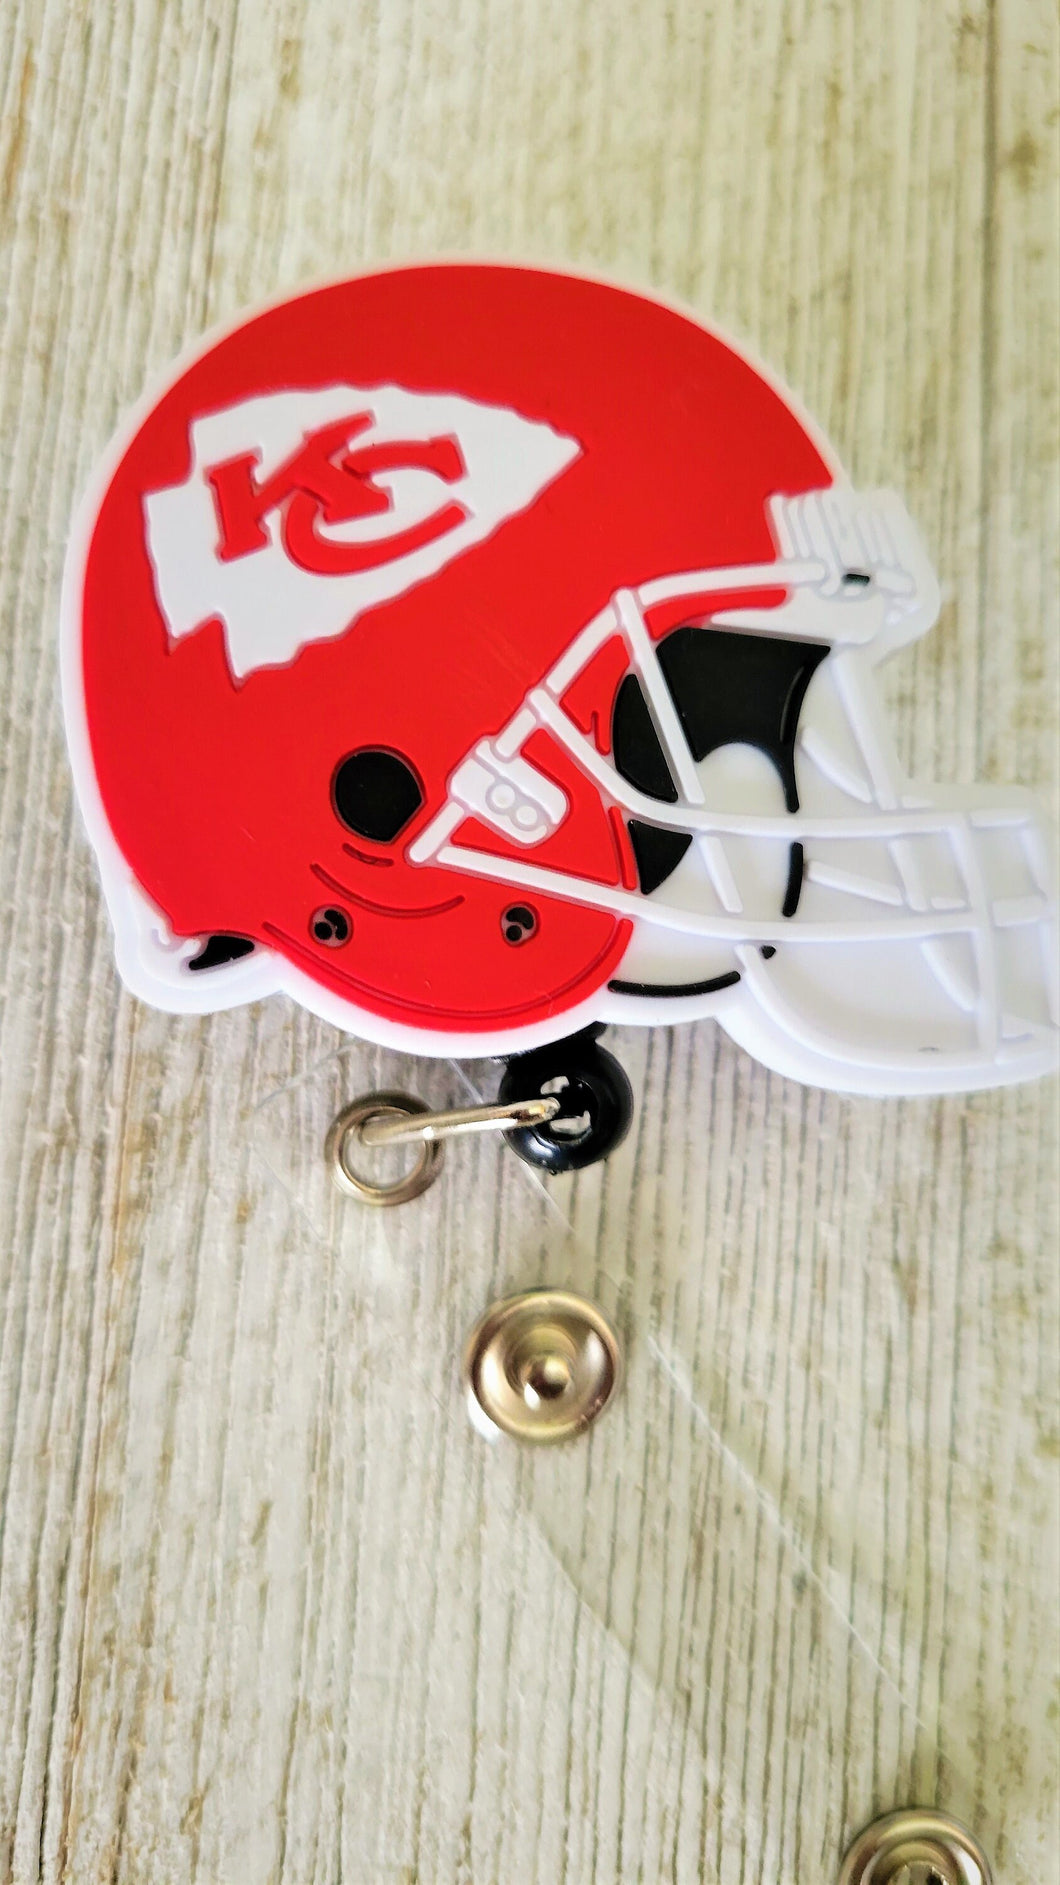 african american, reflections by zana, kansas city chiefs, helmet, badge reel, chiefs-themed badge holder, kansas city football helmet design, chiefs fan gear, nfl badge reel, football helmet badge accessory, chiefs office accessory, red and gold badge reel, kansas city sports merchandise, unique badge reel design, chiefs workwear, nfl team badge holder, chiefs pride, kansas city-themed work accessory, football fan gear, chiefs emblem badge holder, arrowhead badge reel, kansas city sports fan accessory